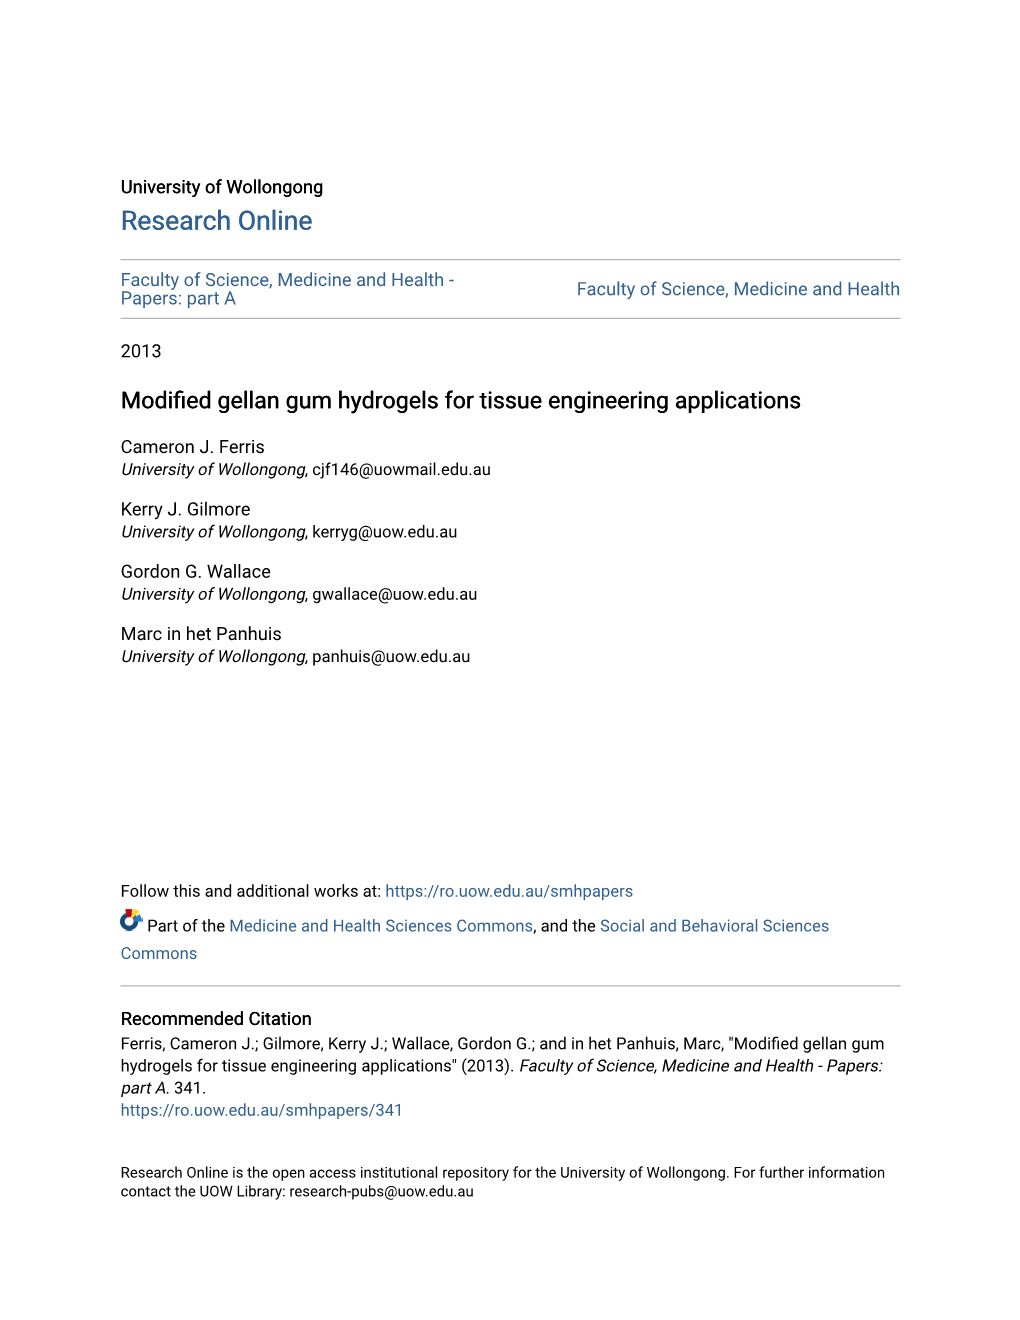 Modified Gellan Gum Hydrogels for Tissue Engineering Applications